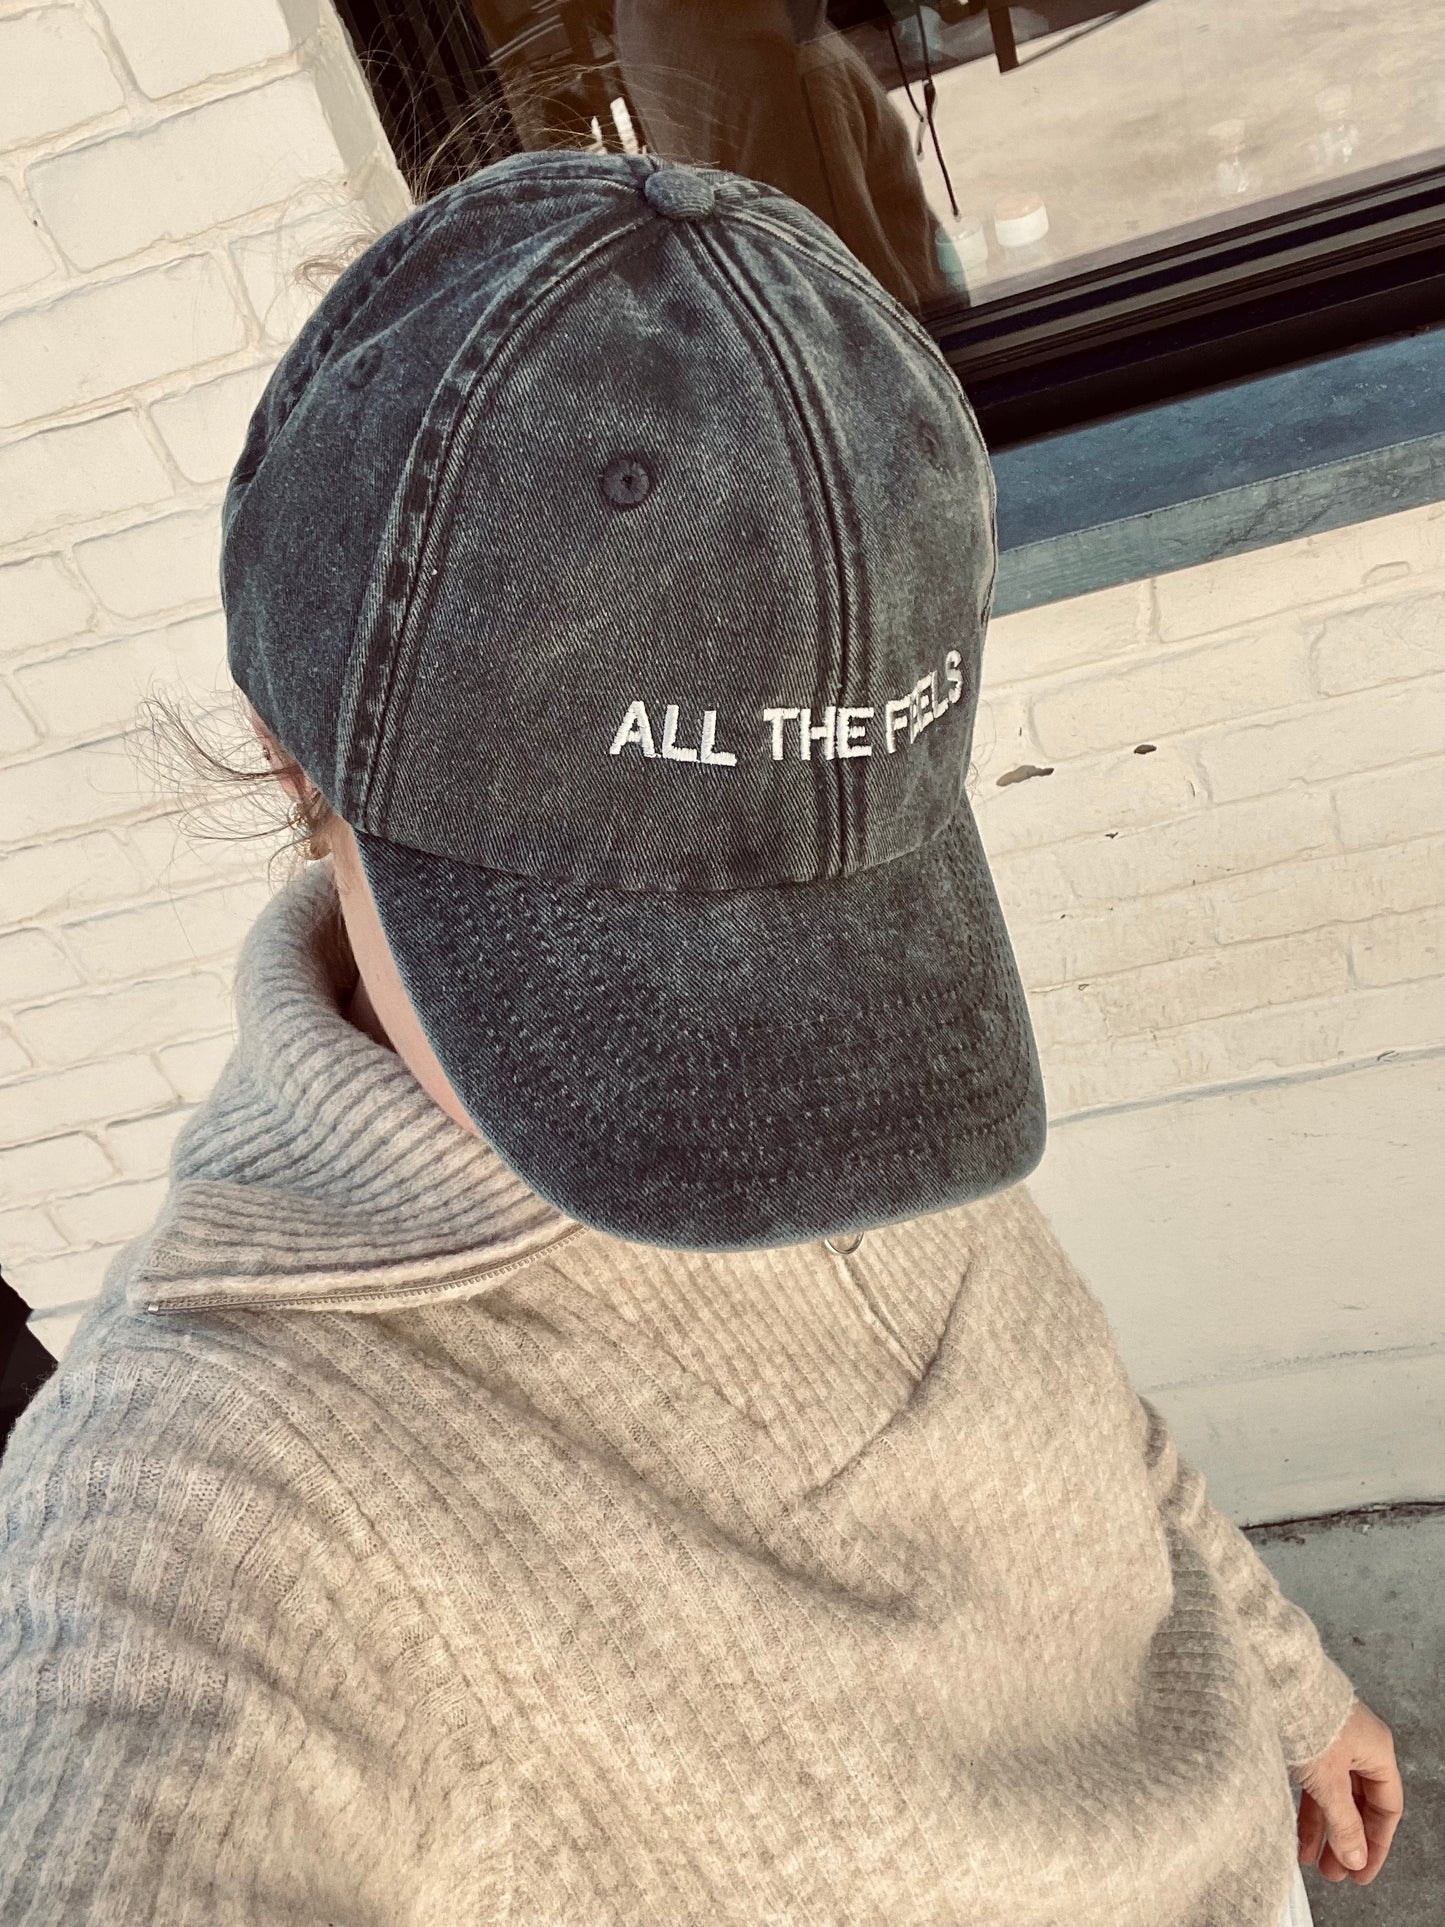 All the feels - vintage dad cap